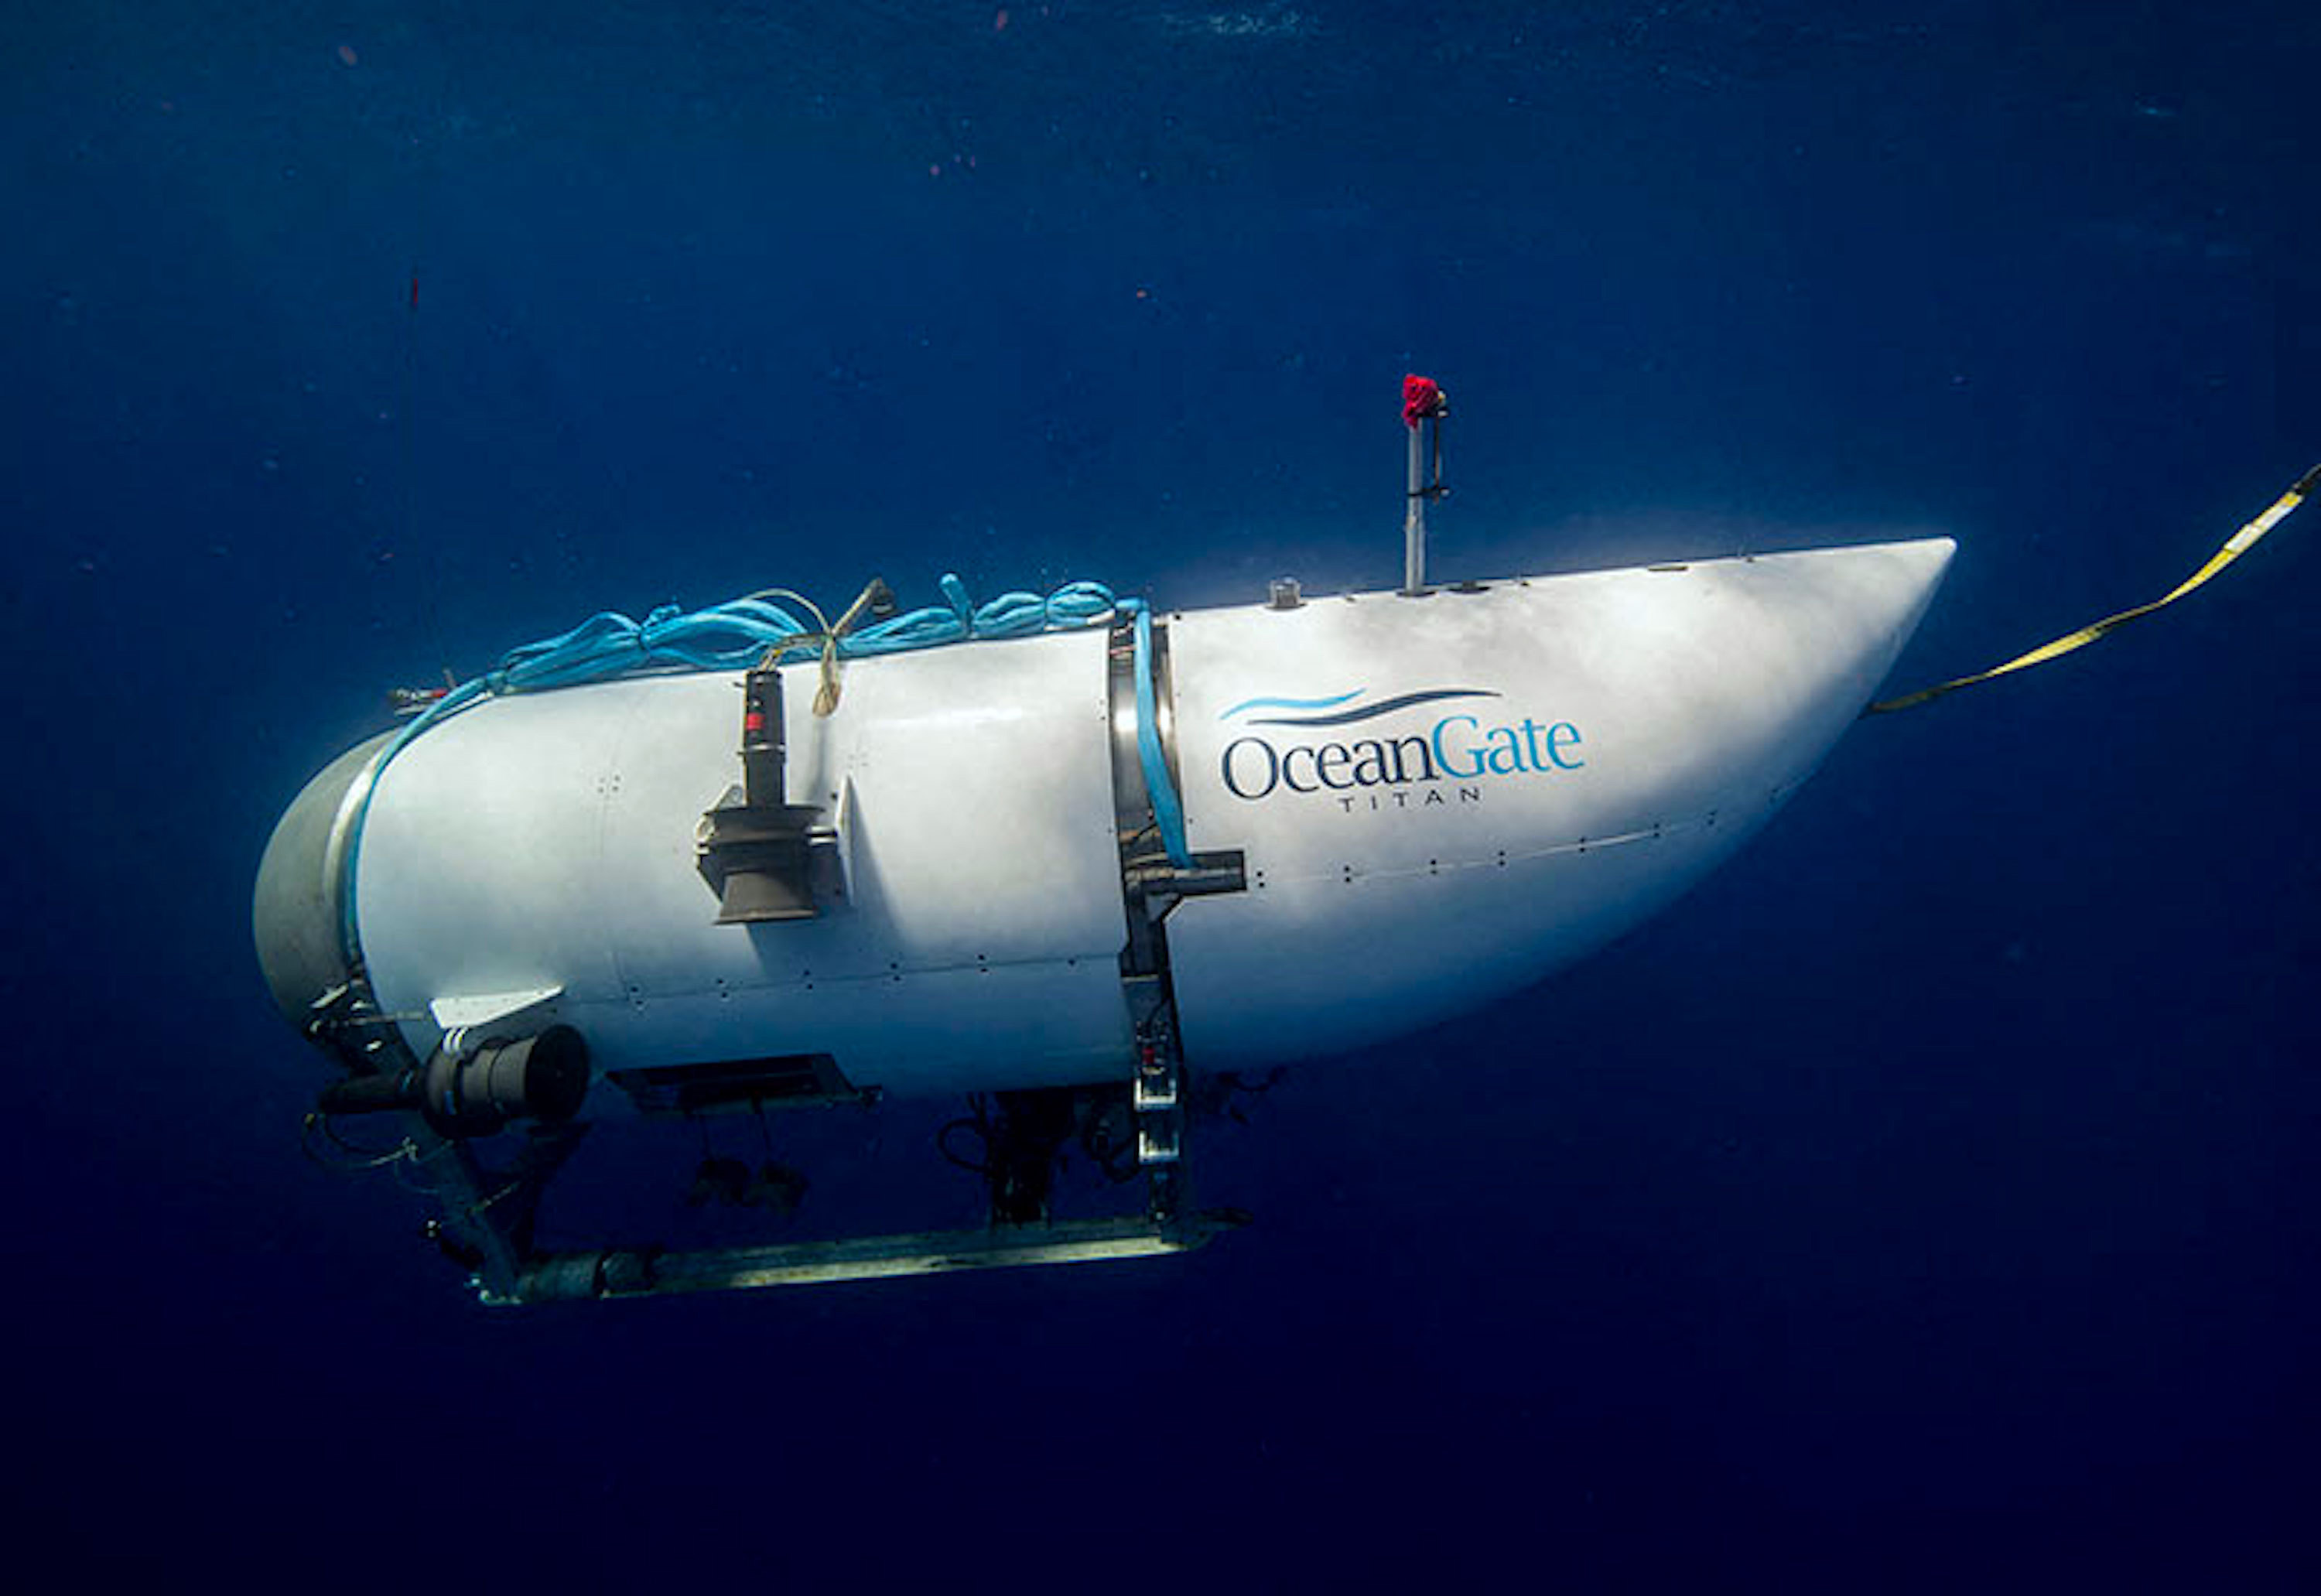 Titan, the submersible that vanished on an expedition to the Titanic wreckage. Photo: TNS